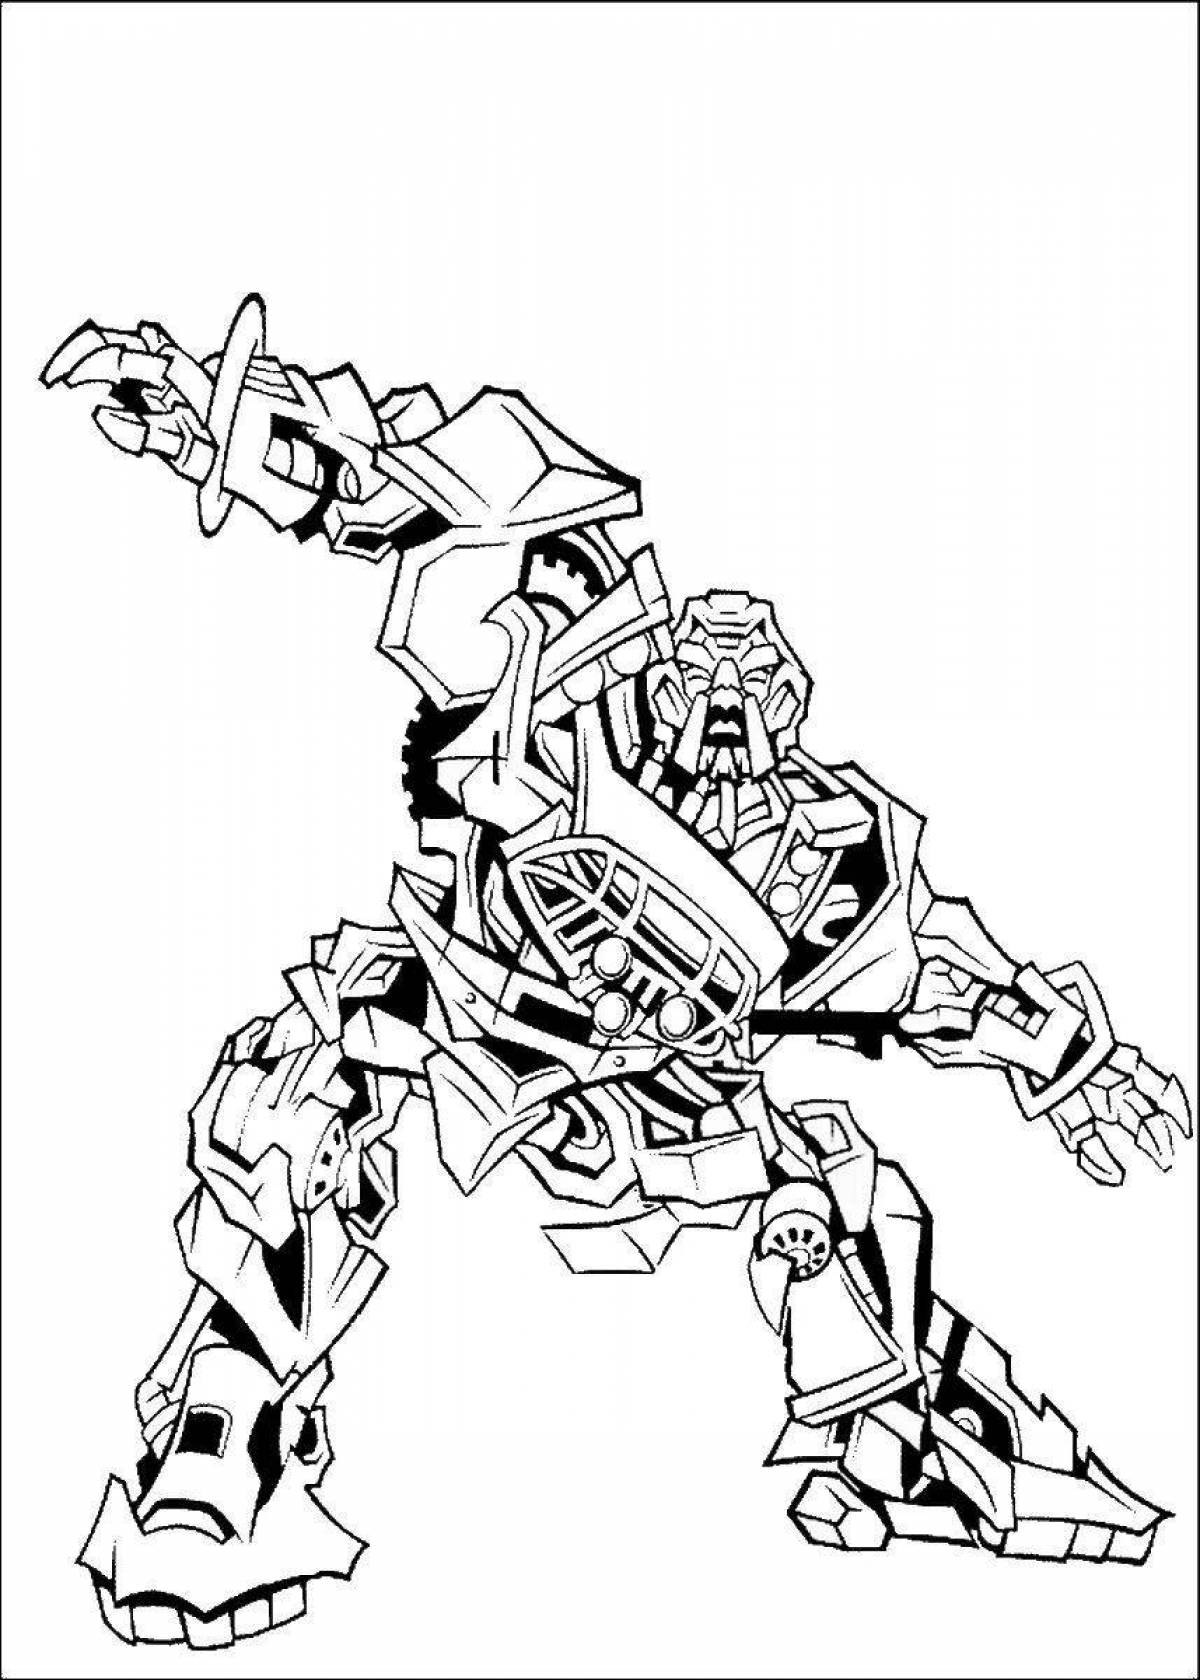 Dazzling Transformers coloring page